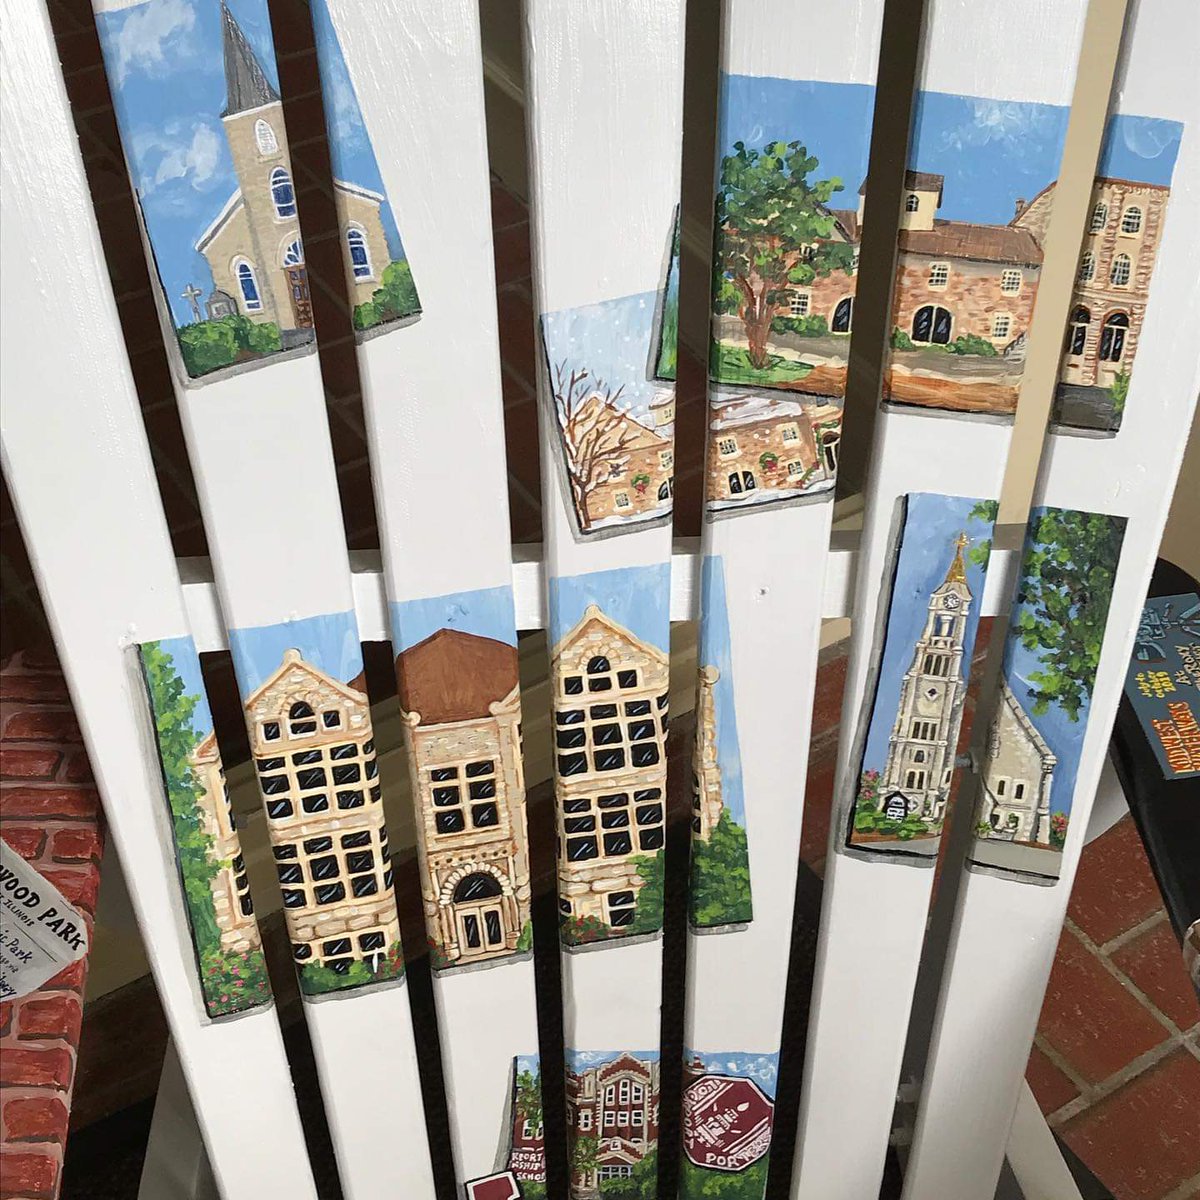 LAGHS Adirondack chair for Lockport’s Summer Art Series is finished and on display in the Lobby of Central Square!  Special thanks to talented artist Dawn Hoffman! #lockportil #Adirondackchairs  #lockportsummerartseries